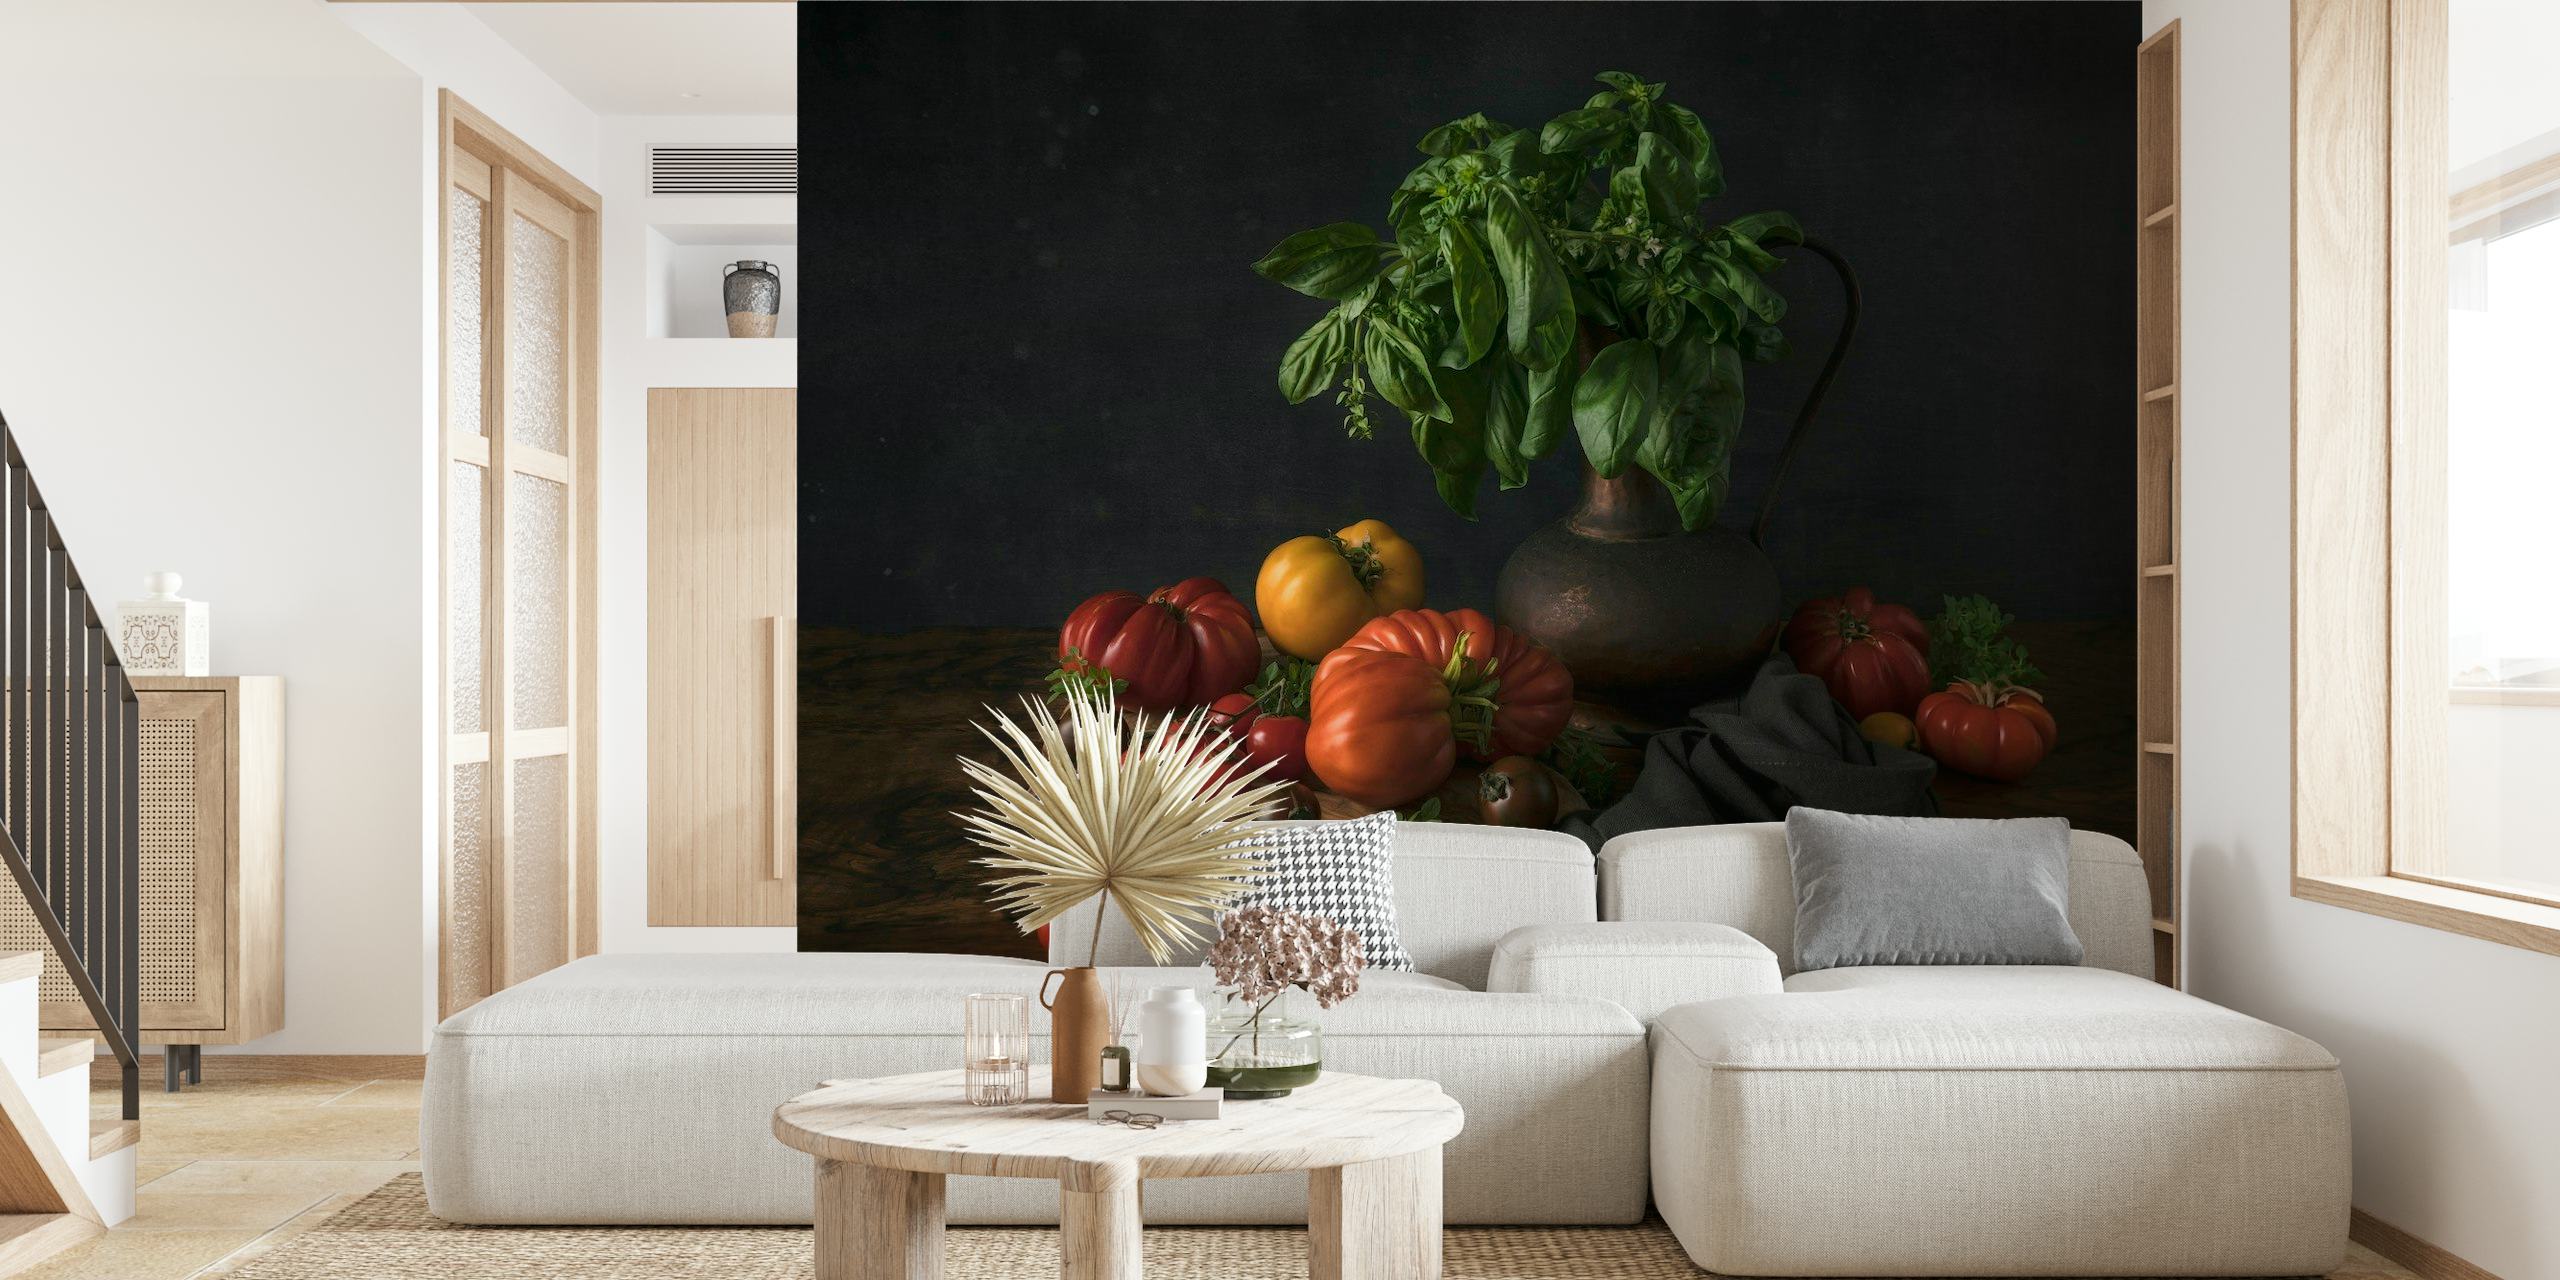 Wall mural depicting a still life arrangement of tomatoes and basil on a dark background with a moody ambiance.